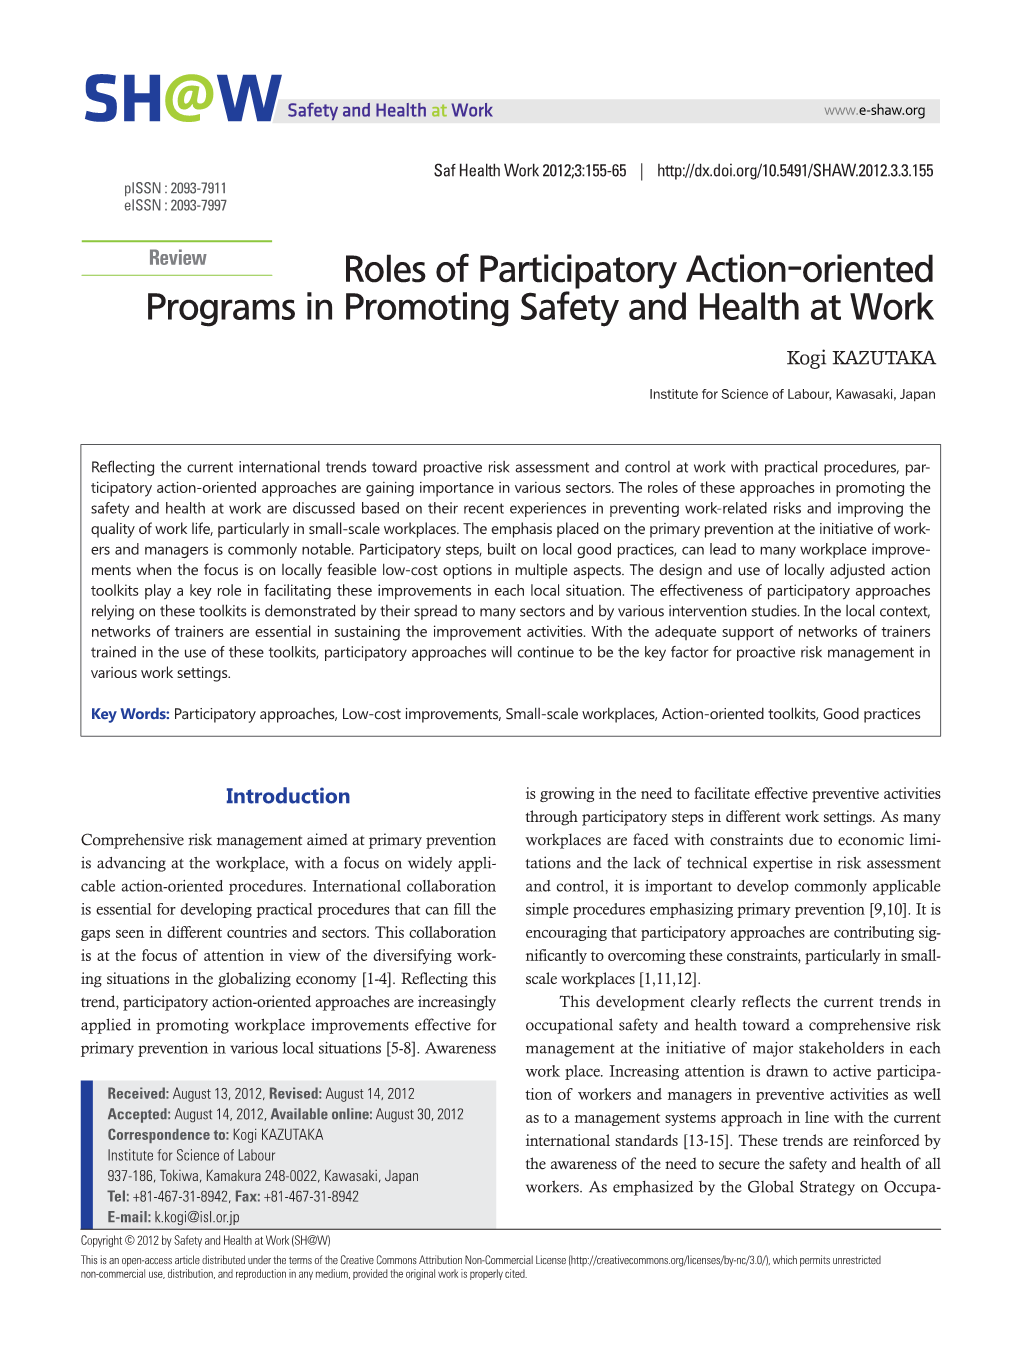 Roles of Participatory Action-Oriented Programs in Promoting Safety and Health at Work